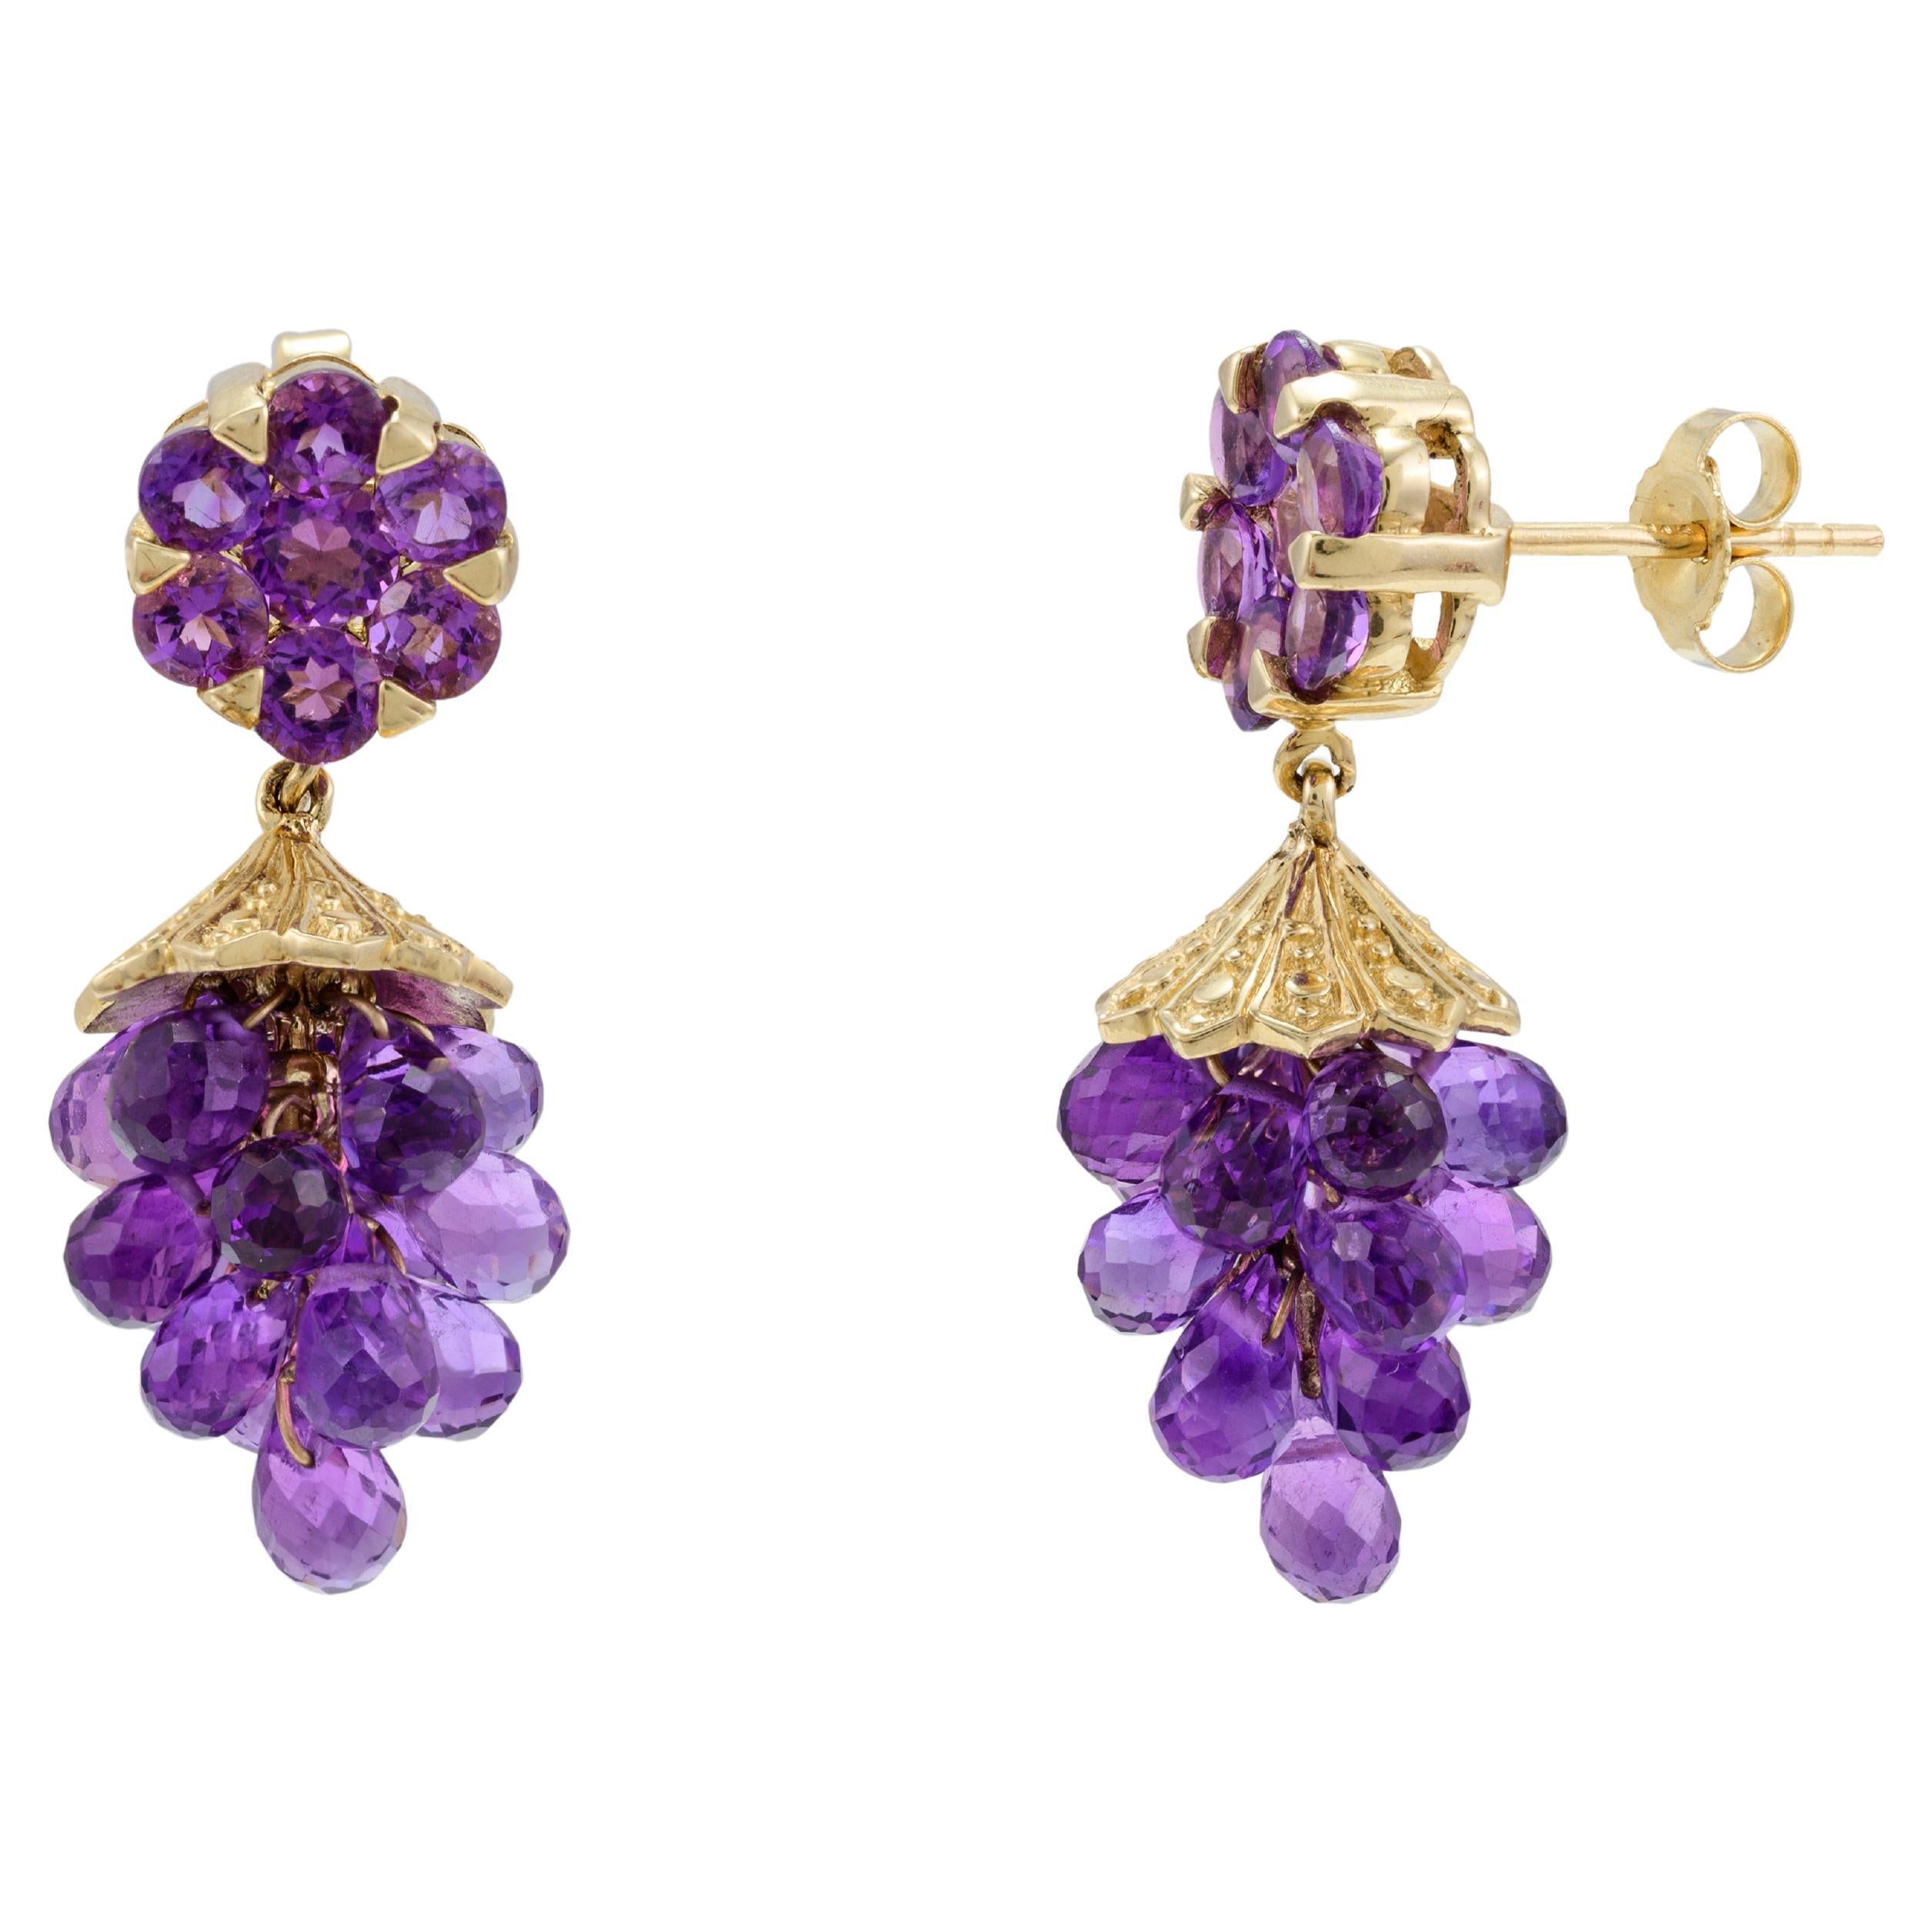 14.18 Carats Amethyst Gemstone Grapes Dangle Earrings 14k Solid Yellow Gold